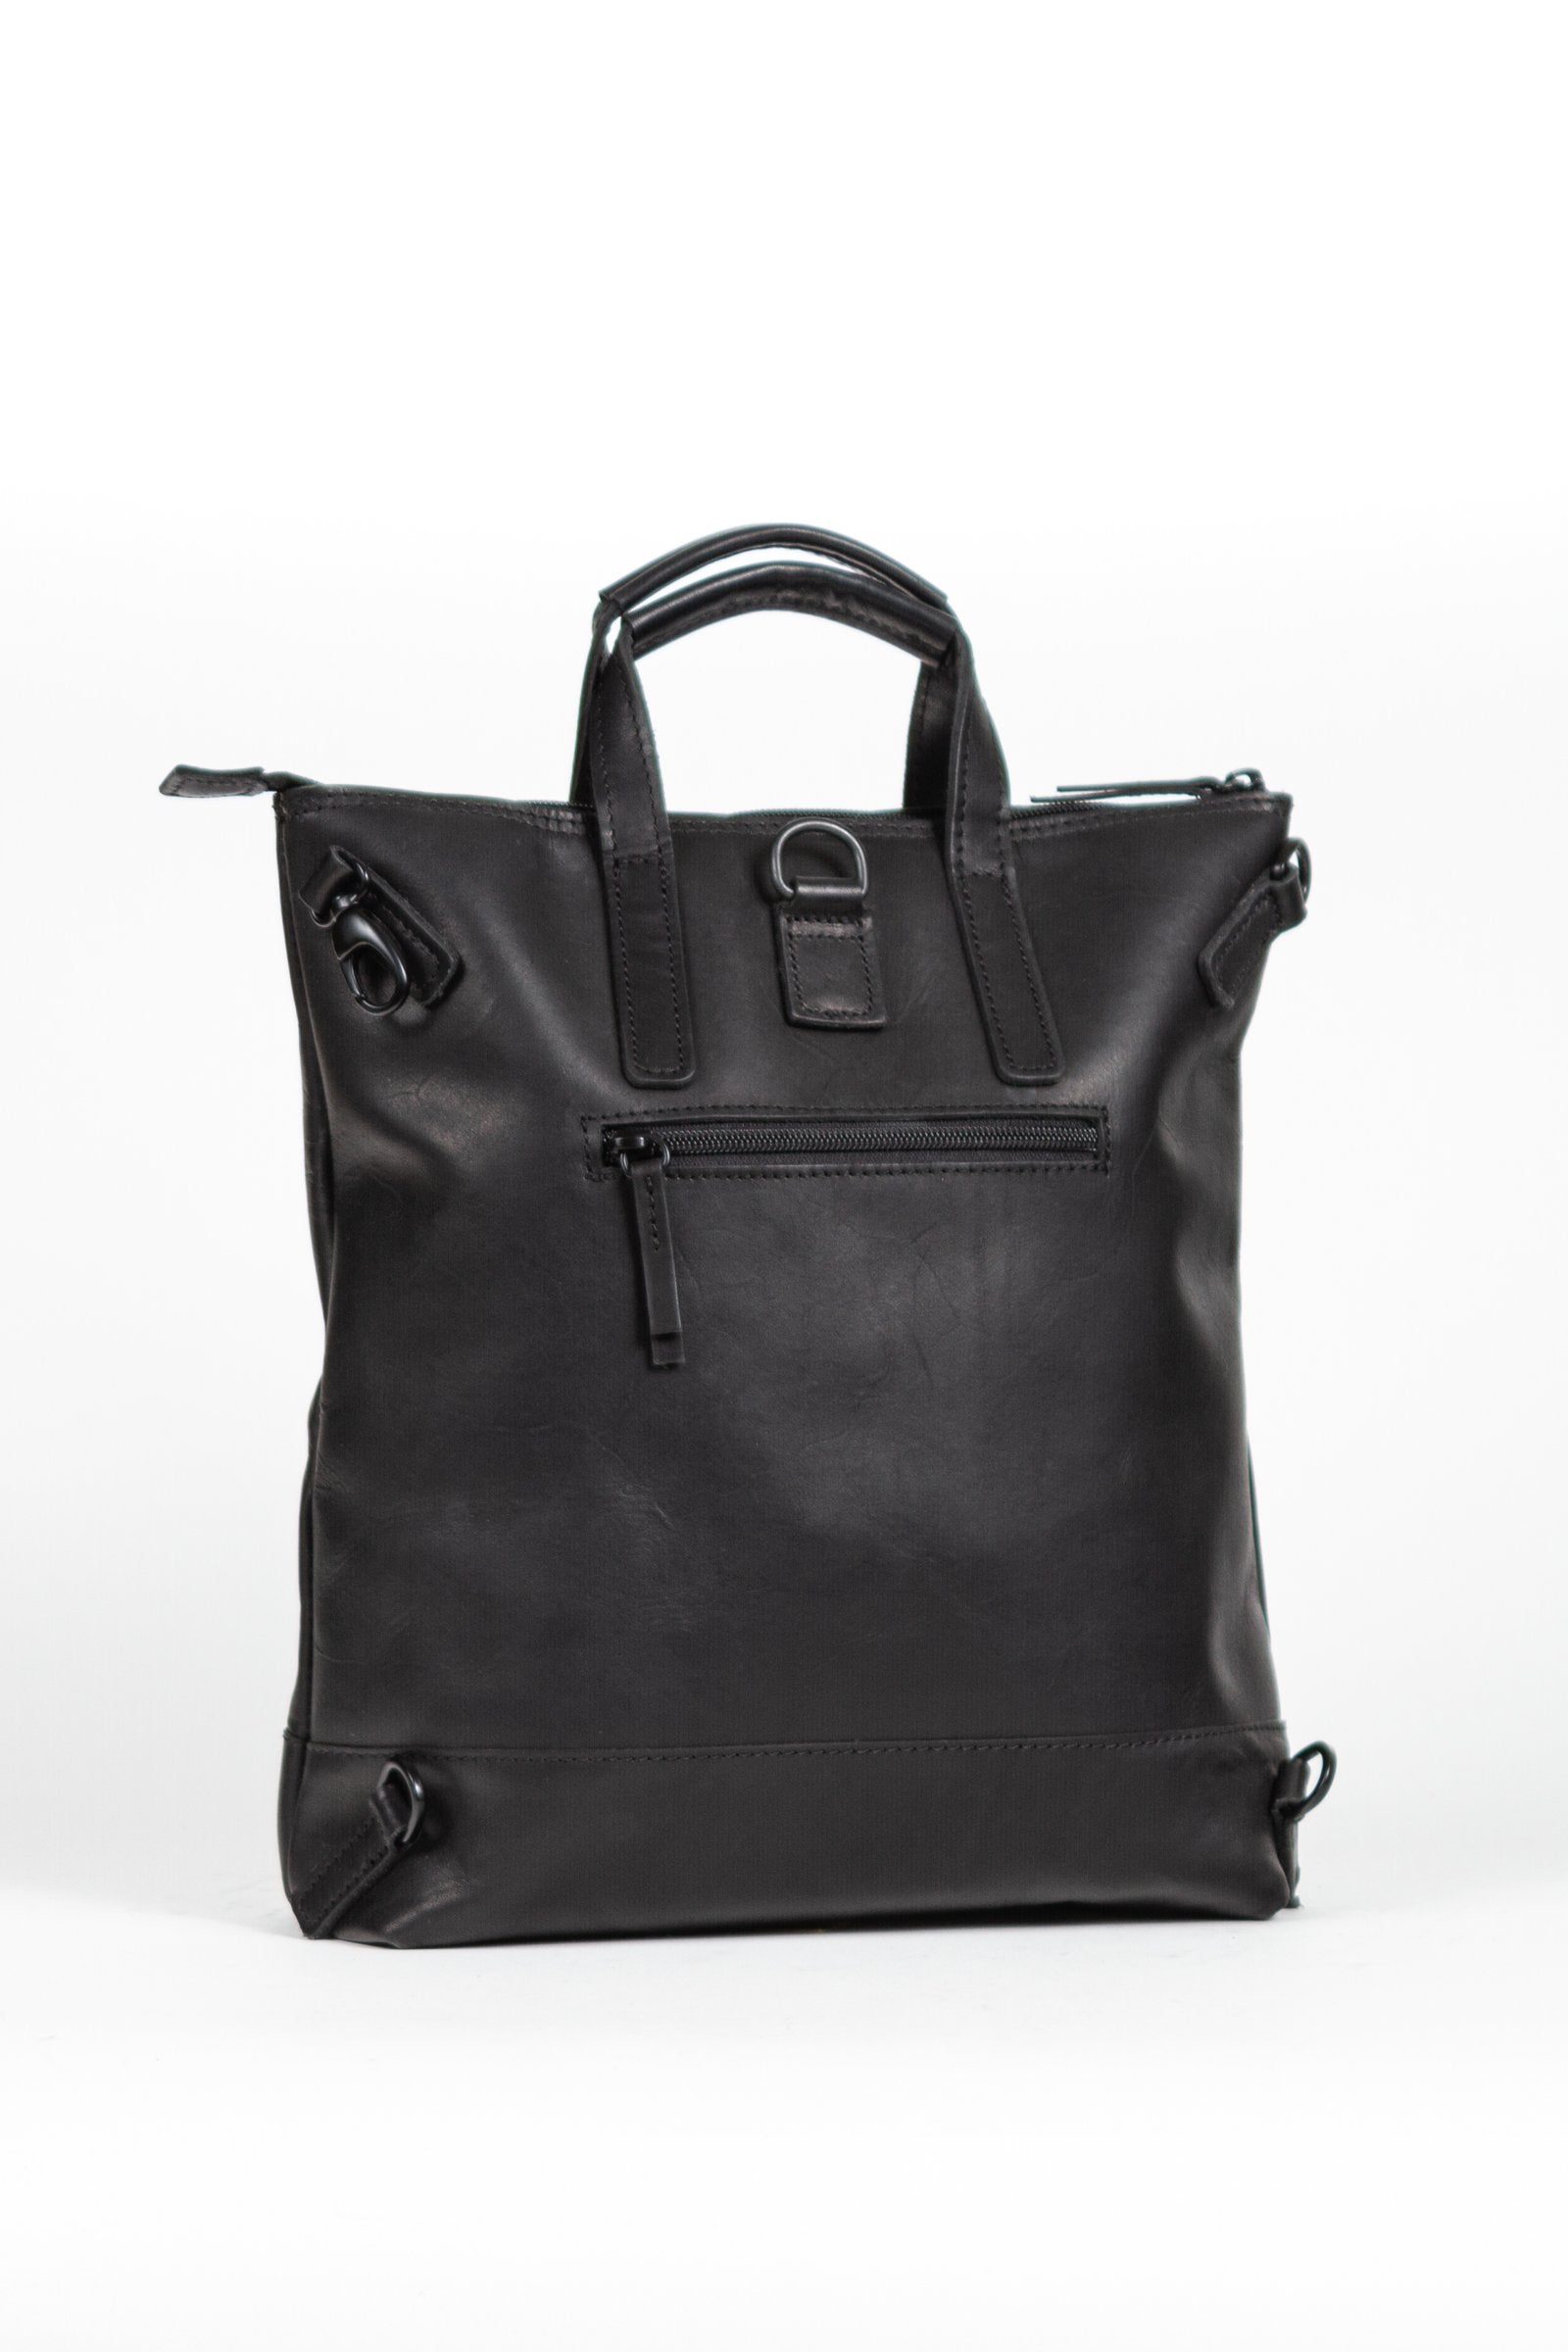 BEON.COM.AU The Jost Futura X-Change Small is a leather bag made in Europe from premium European leathers and fabrics. 3 in 1 bag that can be worn as a backpack, shoulder bag and handbag Made in smooth cowhide with pull-up effect Fits up to 13" laptop Closes with zipper Padded laptop compartment Small e... Jost at BEON.COM.AU